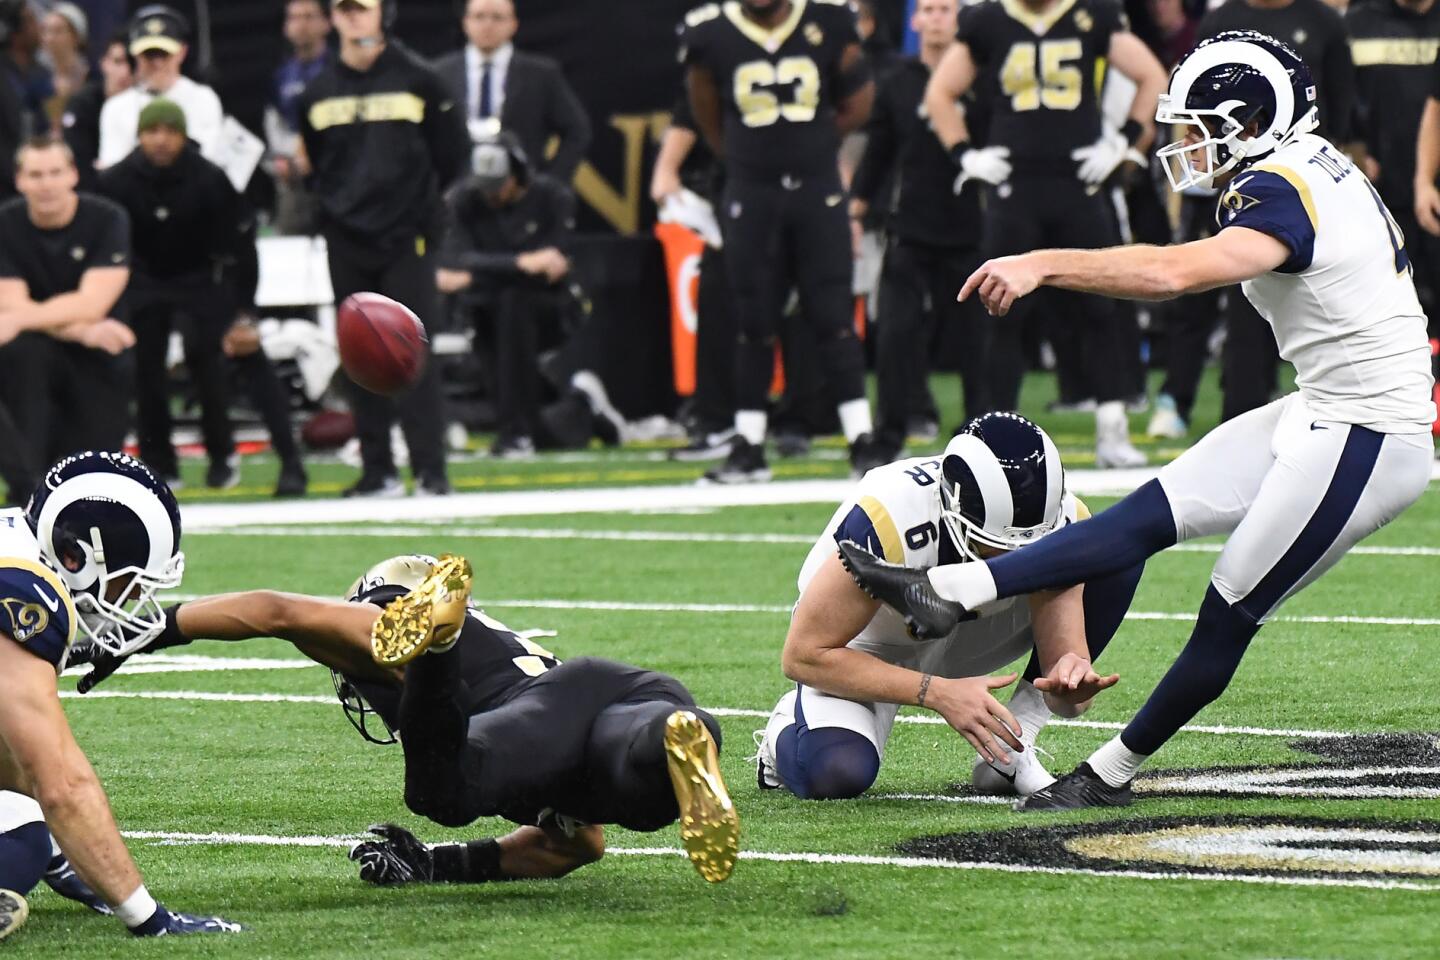 Rams kicker Greg Zuerlein kicks the game-winning field goal in overtime against the New Orleans Saints in the NFC Championship at the Superdome in New Orleans Sunday.